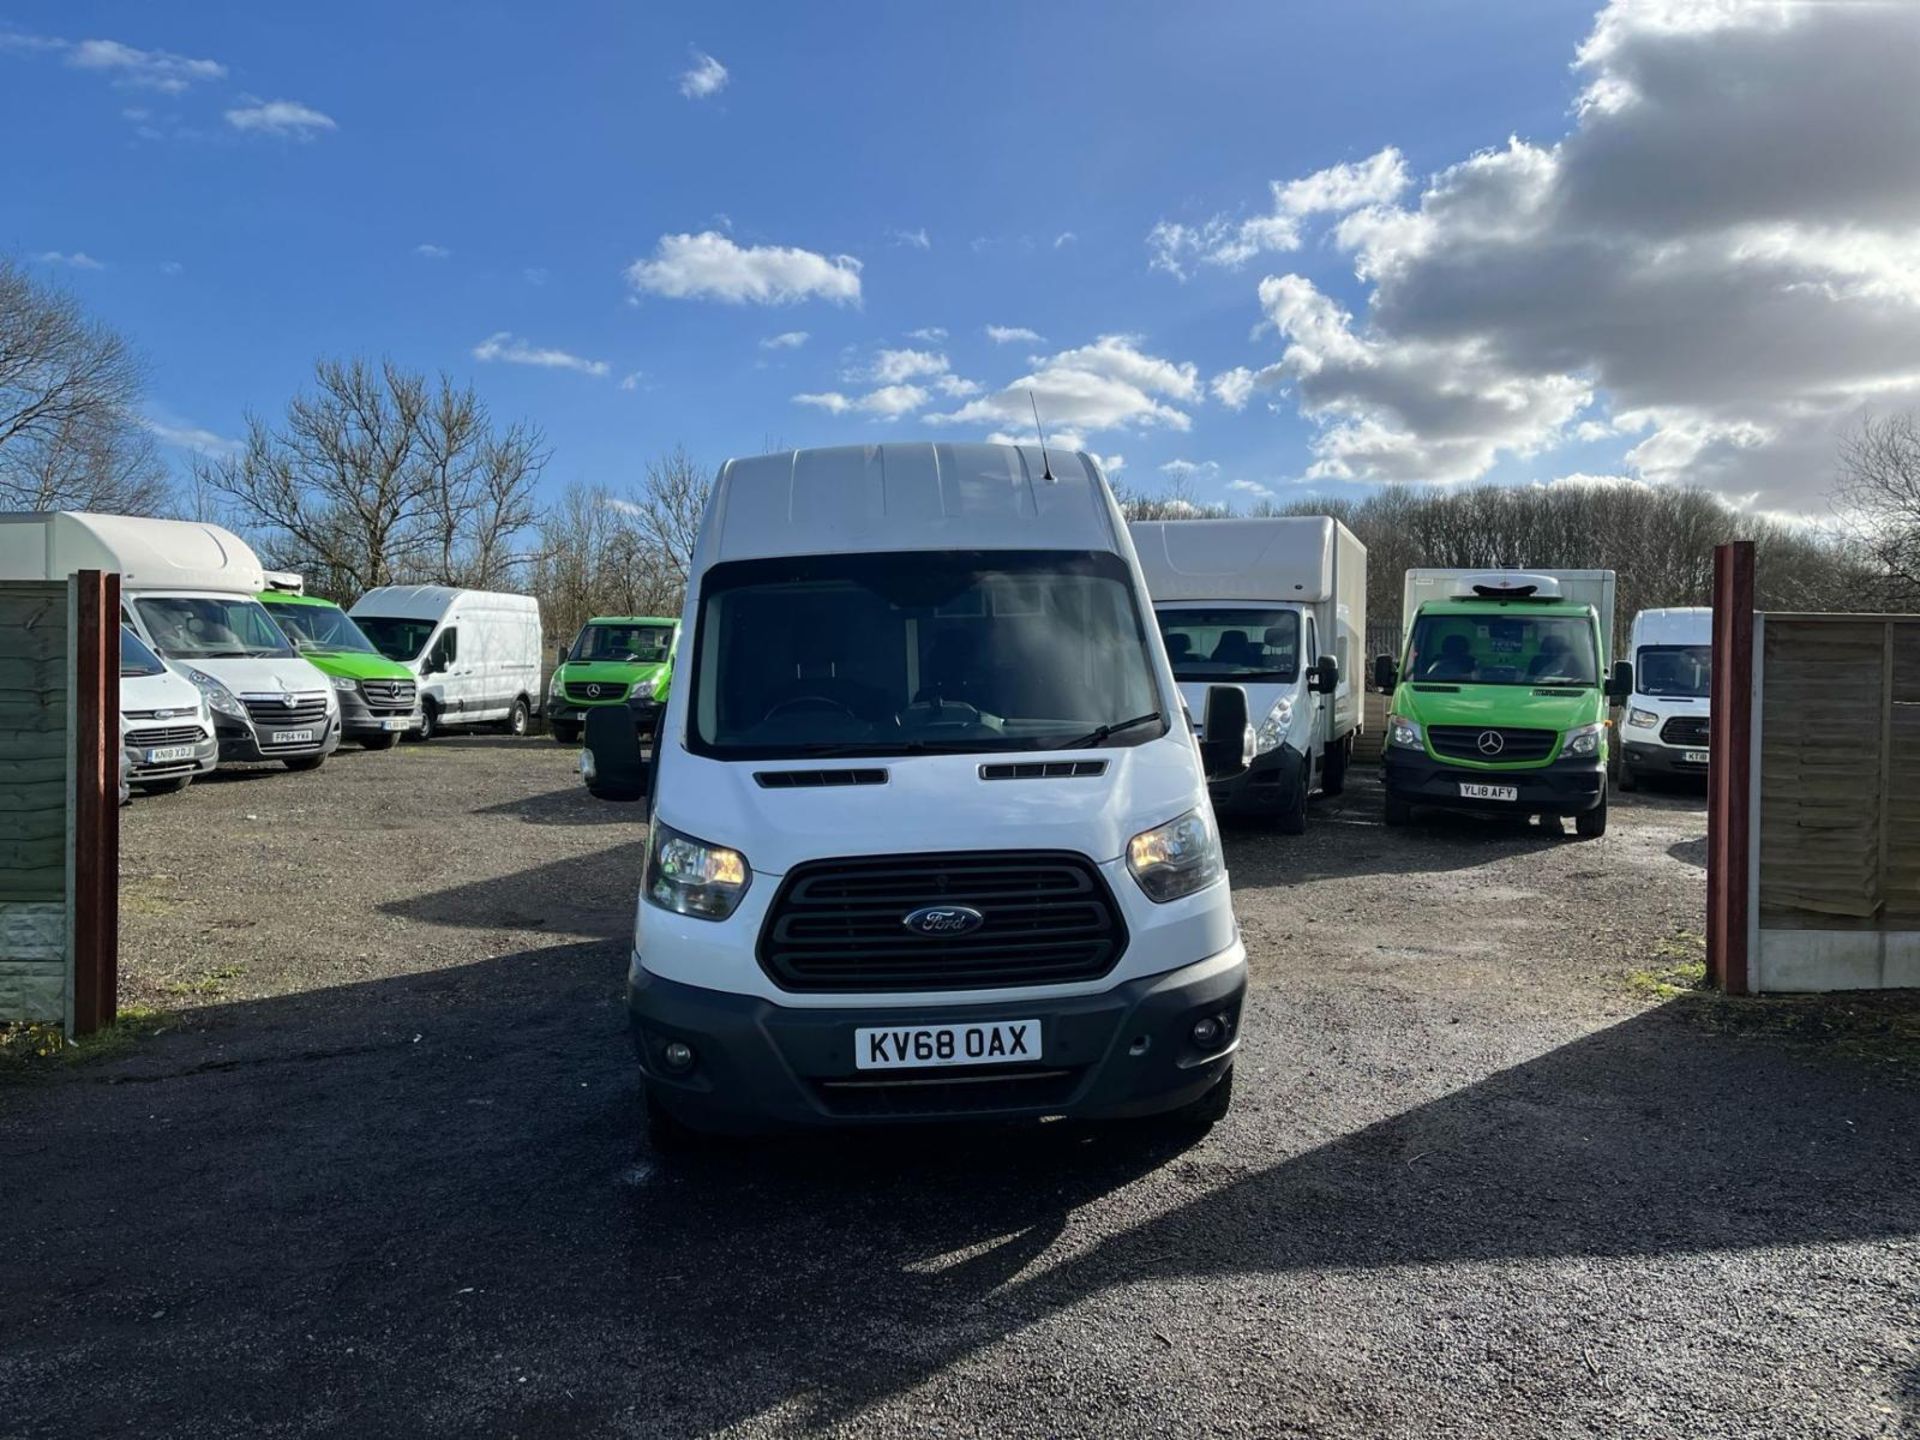 >>>SPECIAL CLEARANCE<<< 2018 FORD TRANSIT 2.0 TDCI 130PS L3 H3 - RELIABLE, SPACIOUS - Image 2 of 16